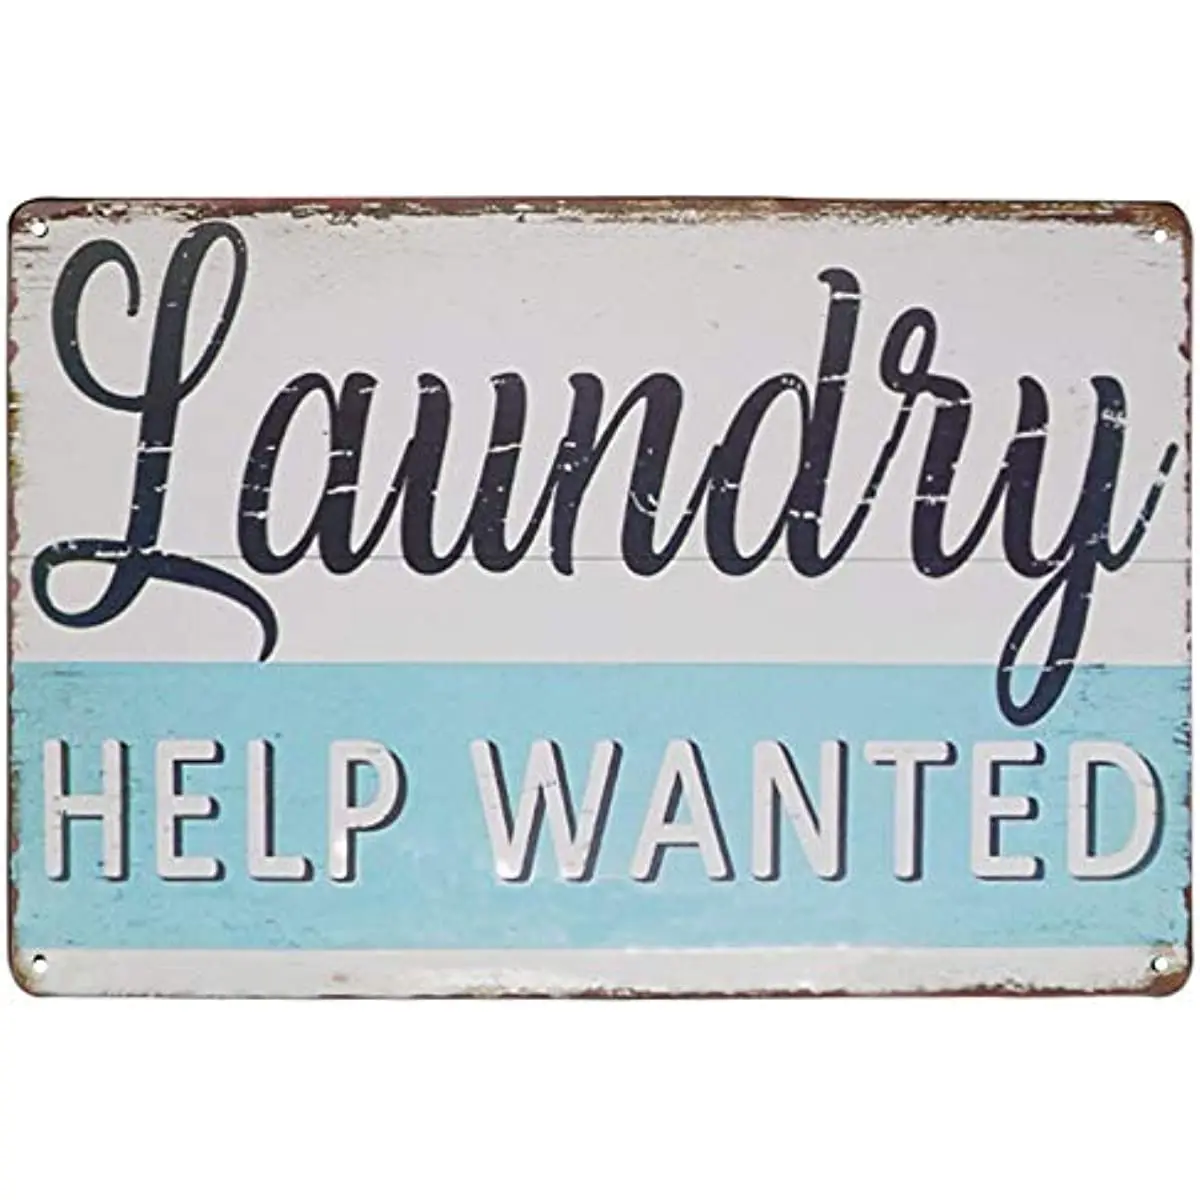 

Laundry Help Wanted Vintage Farmhouse Laundry Room Sign Country Wall Decor Wash Room Signs Wall Home Decor Art Signs 8X12Inch